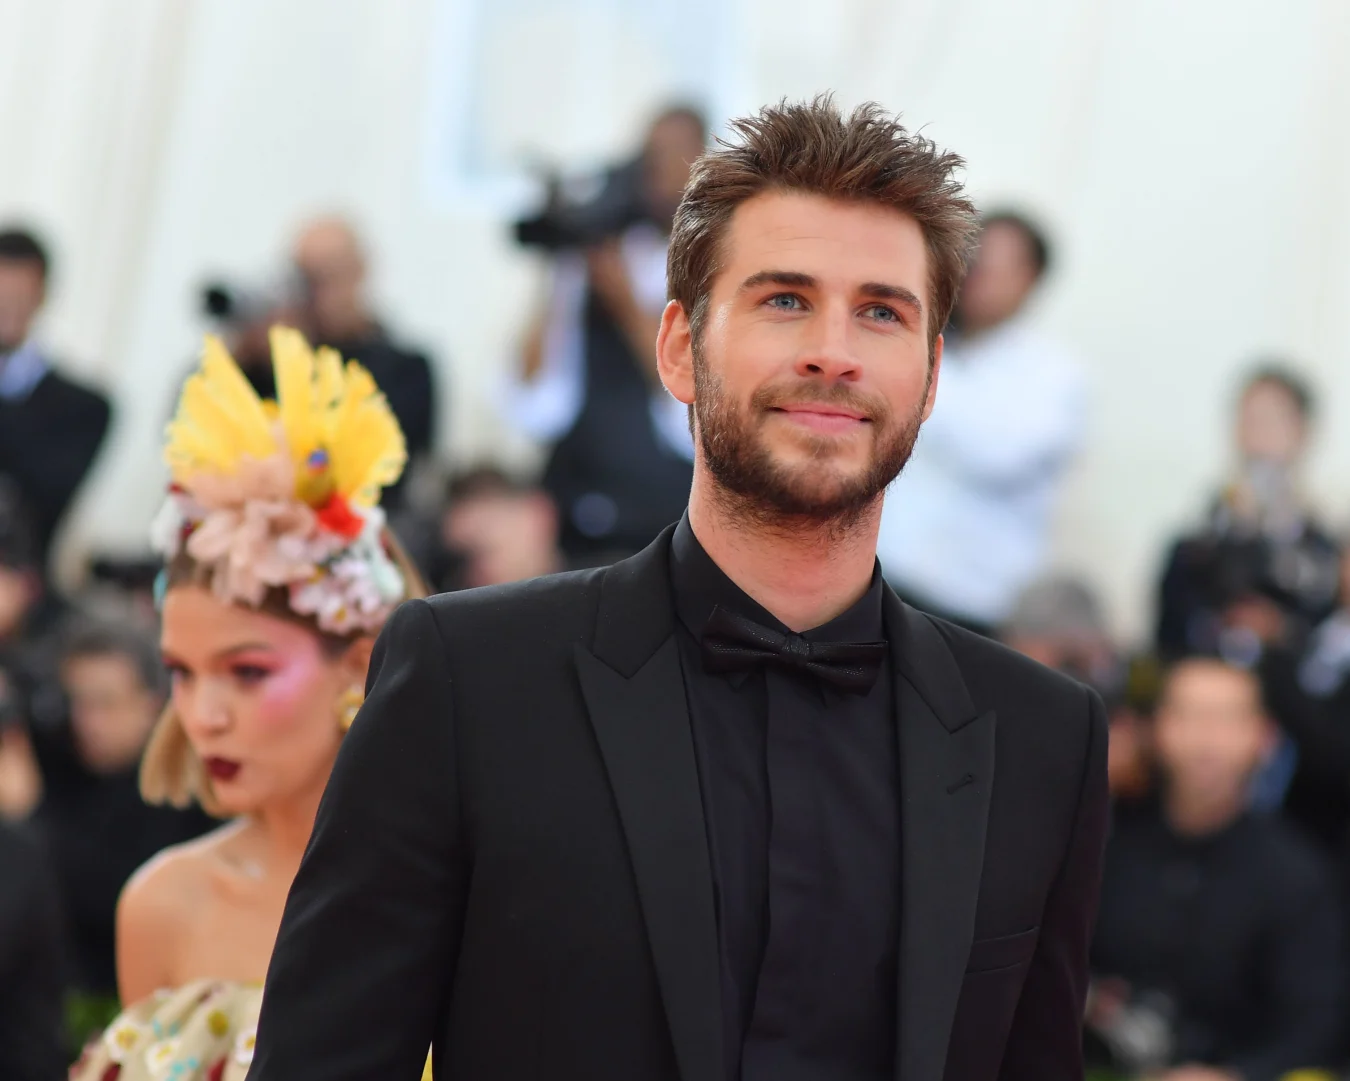 Liam Hemsworth arrives for the 2019 Met Gala at the Metropolitan Museum of Art on May 6, 2019, in New York. - The Gala raises money for the Metropolitan Museum of Arts Costume Institute. The Gala's 2019 theme is Camp: Notes on Fashion